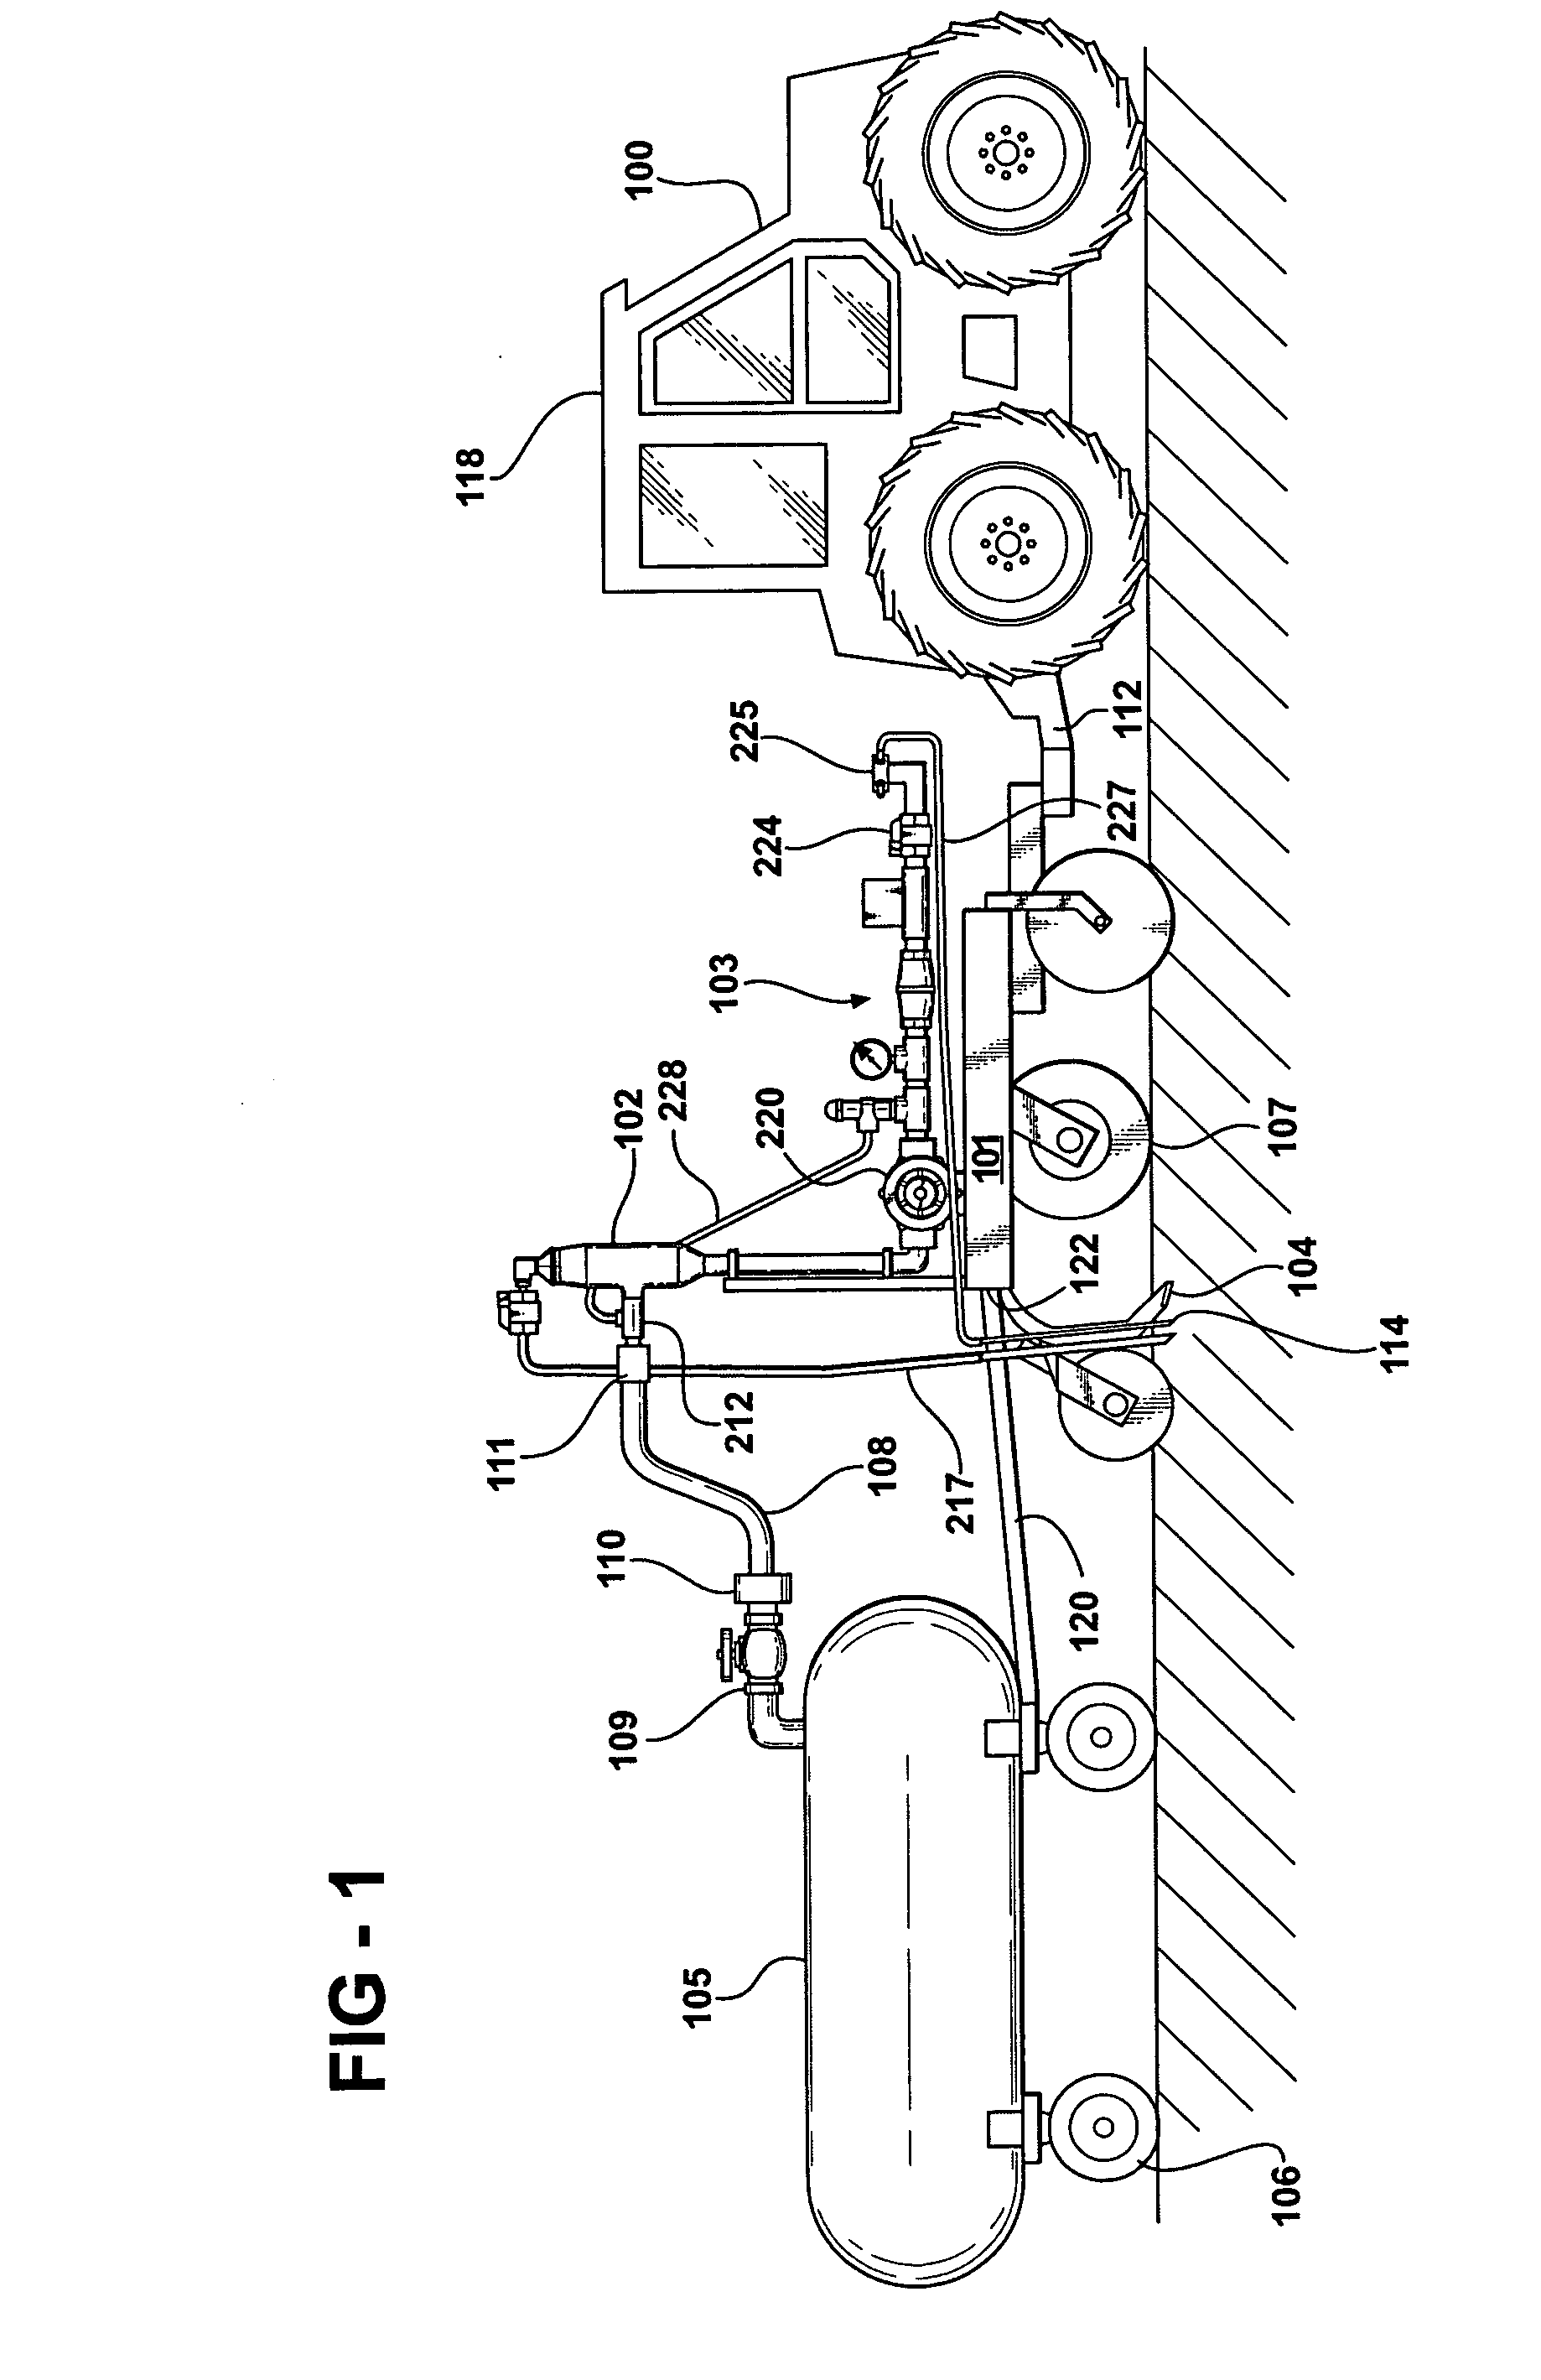 Anhydrous ammonia fertilizer flow control apparatus and method